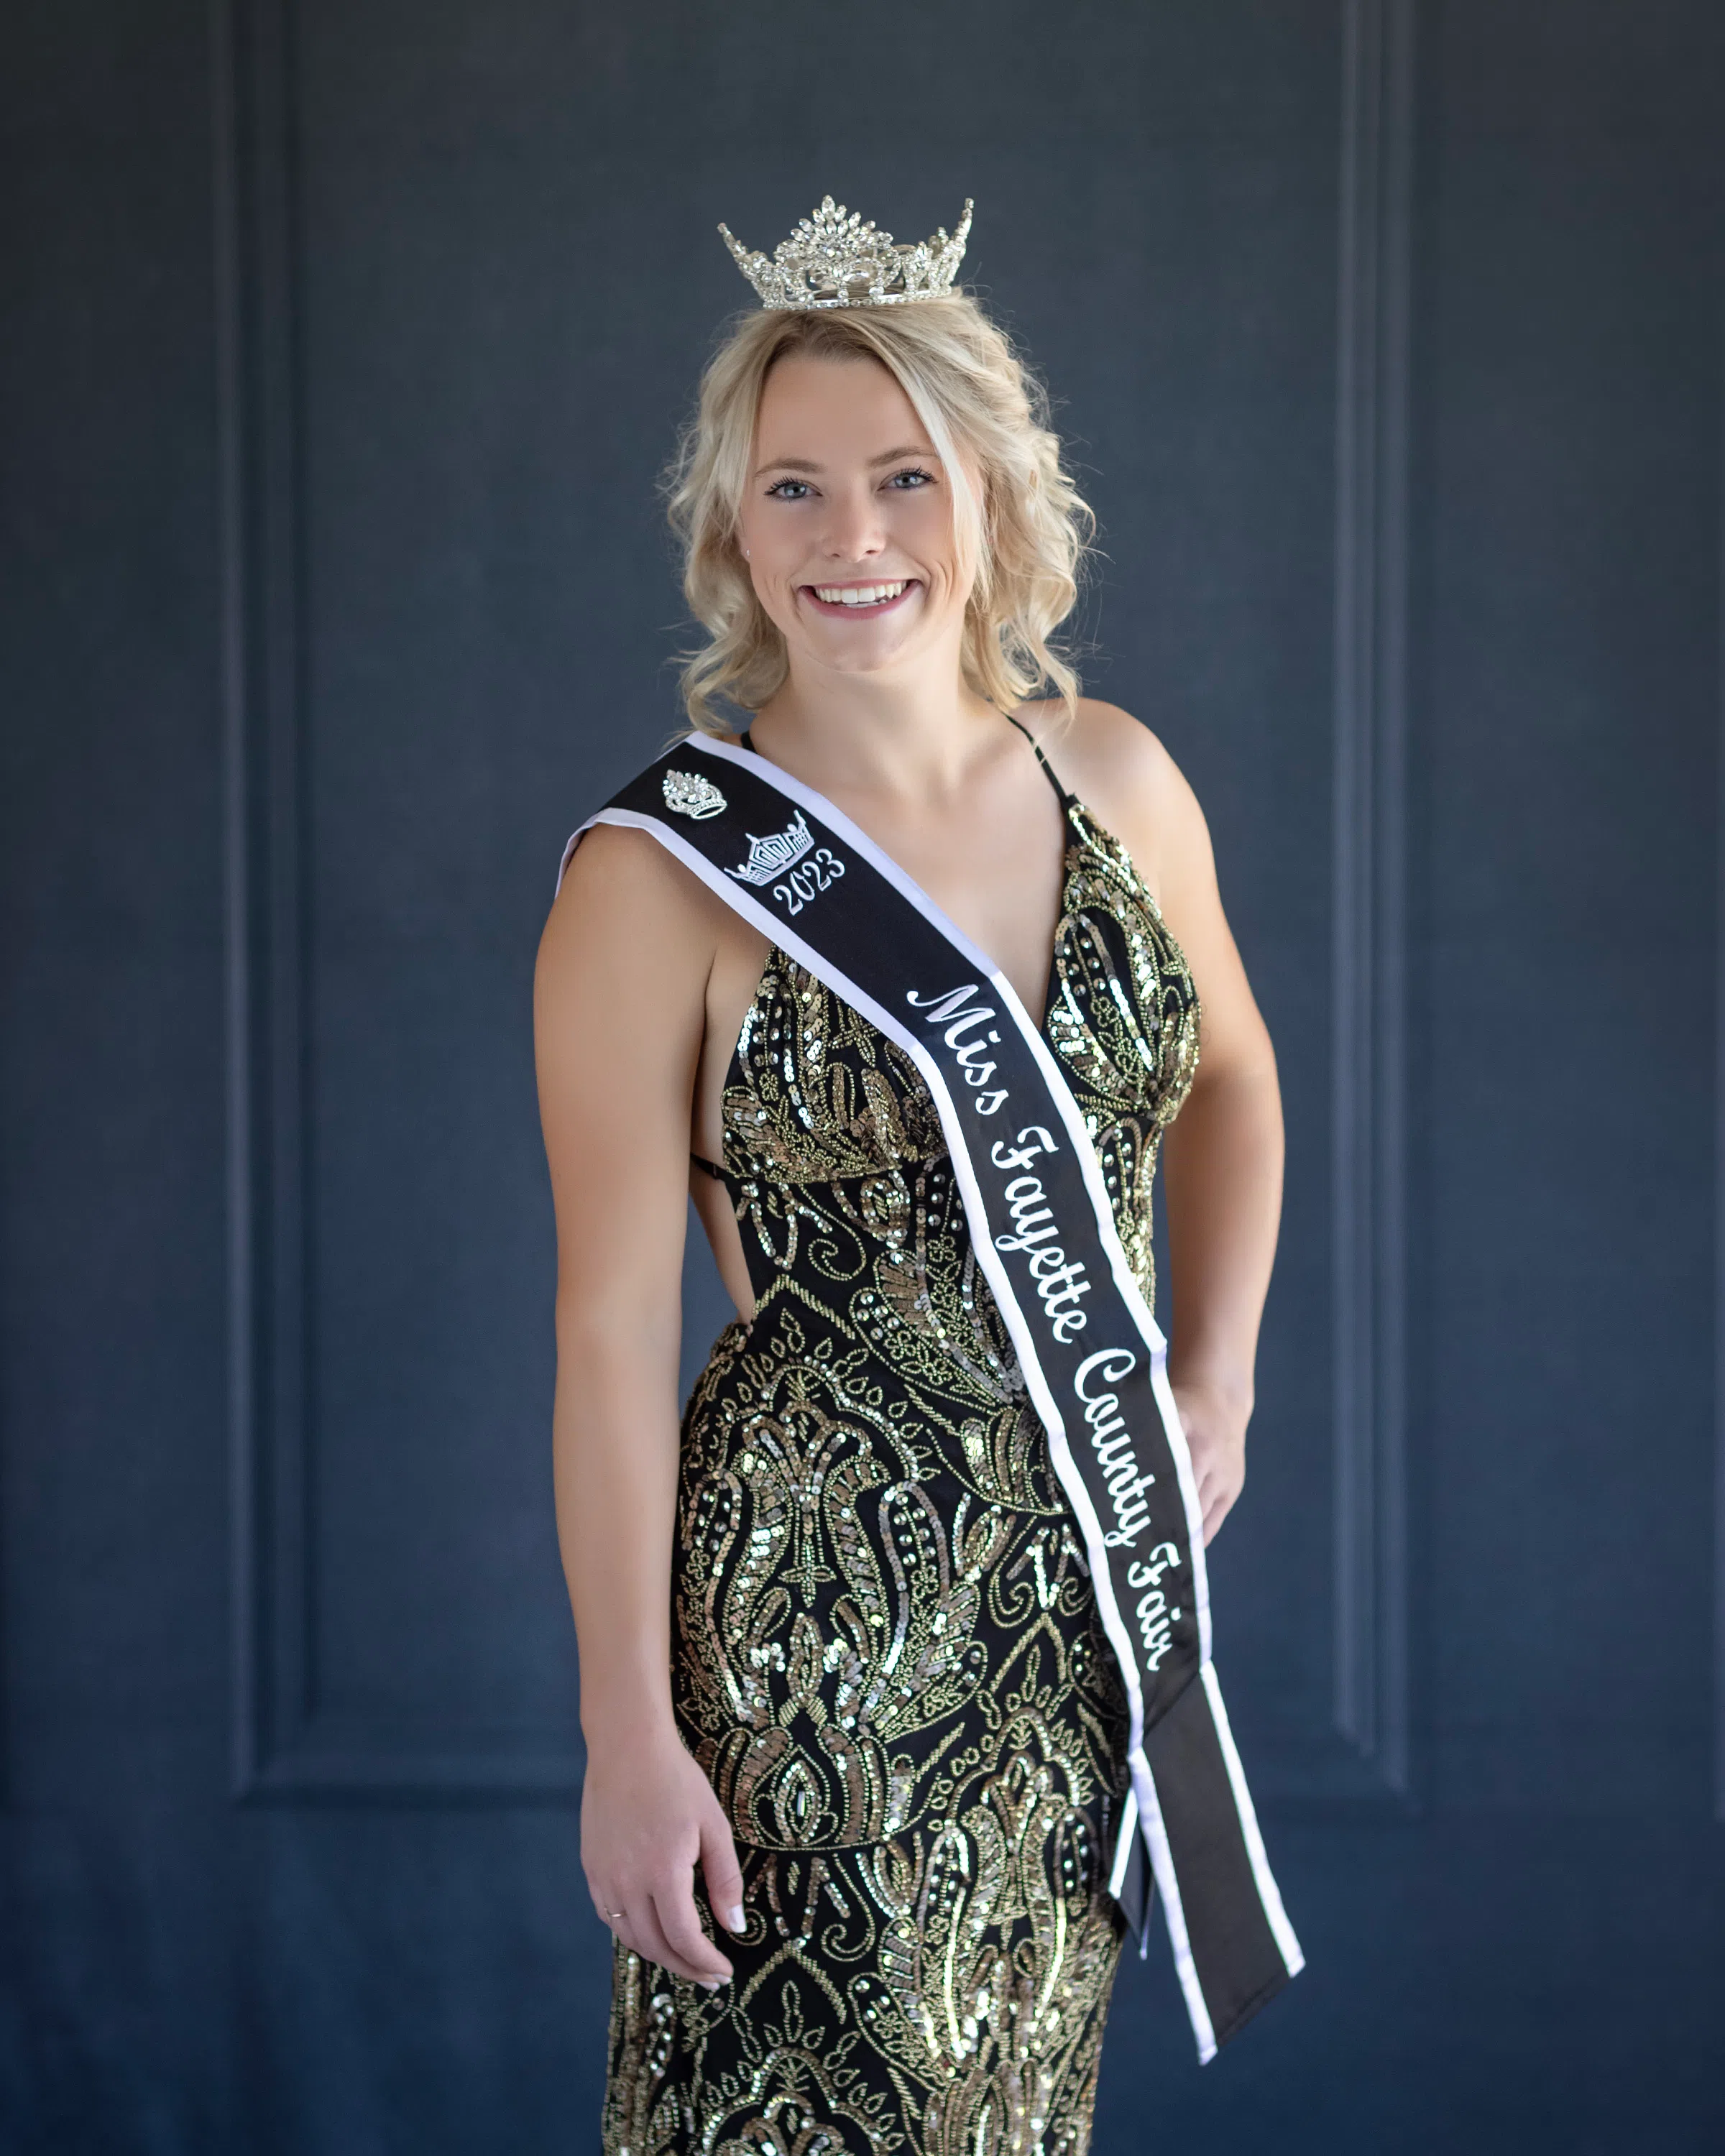 Miss Fayette County Fair Queen 2023 Josie Strauch will compete at Miss Illinois County Fair Queen Pageant